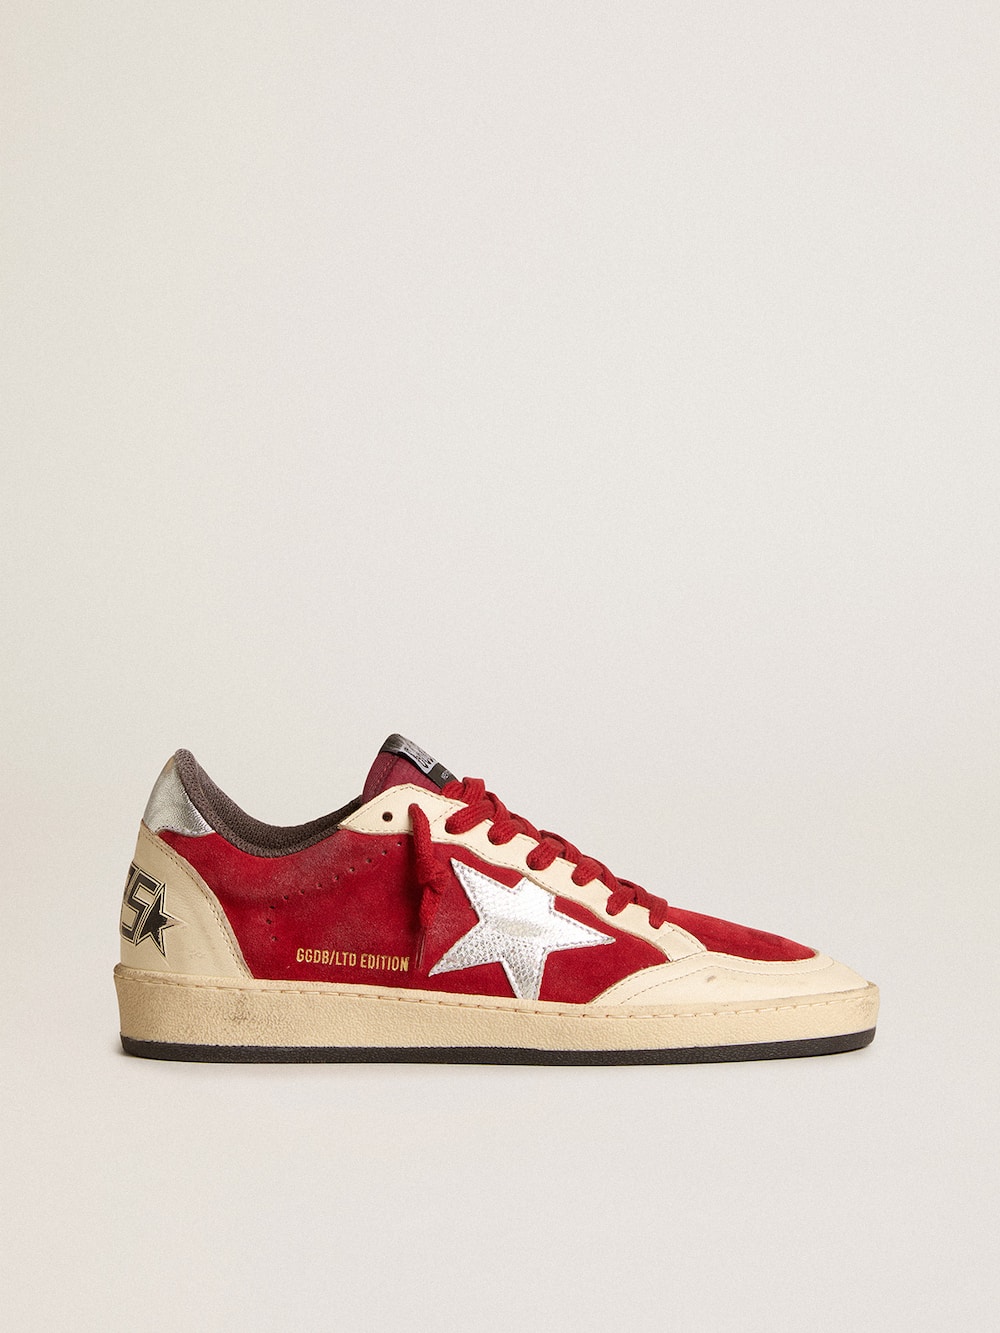 Golden Goose - Ball Star in burgundy suede with silver leather star and heel tab in 